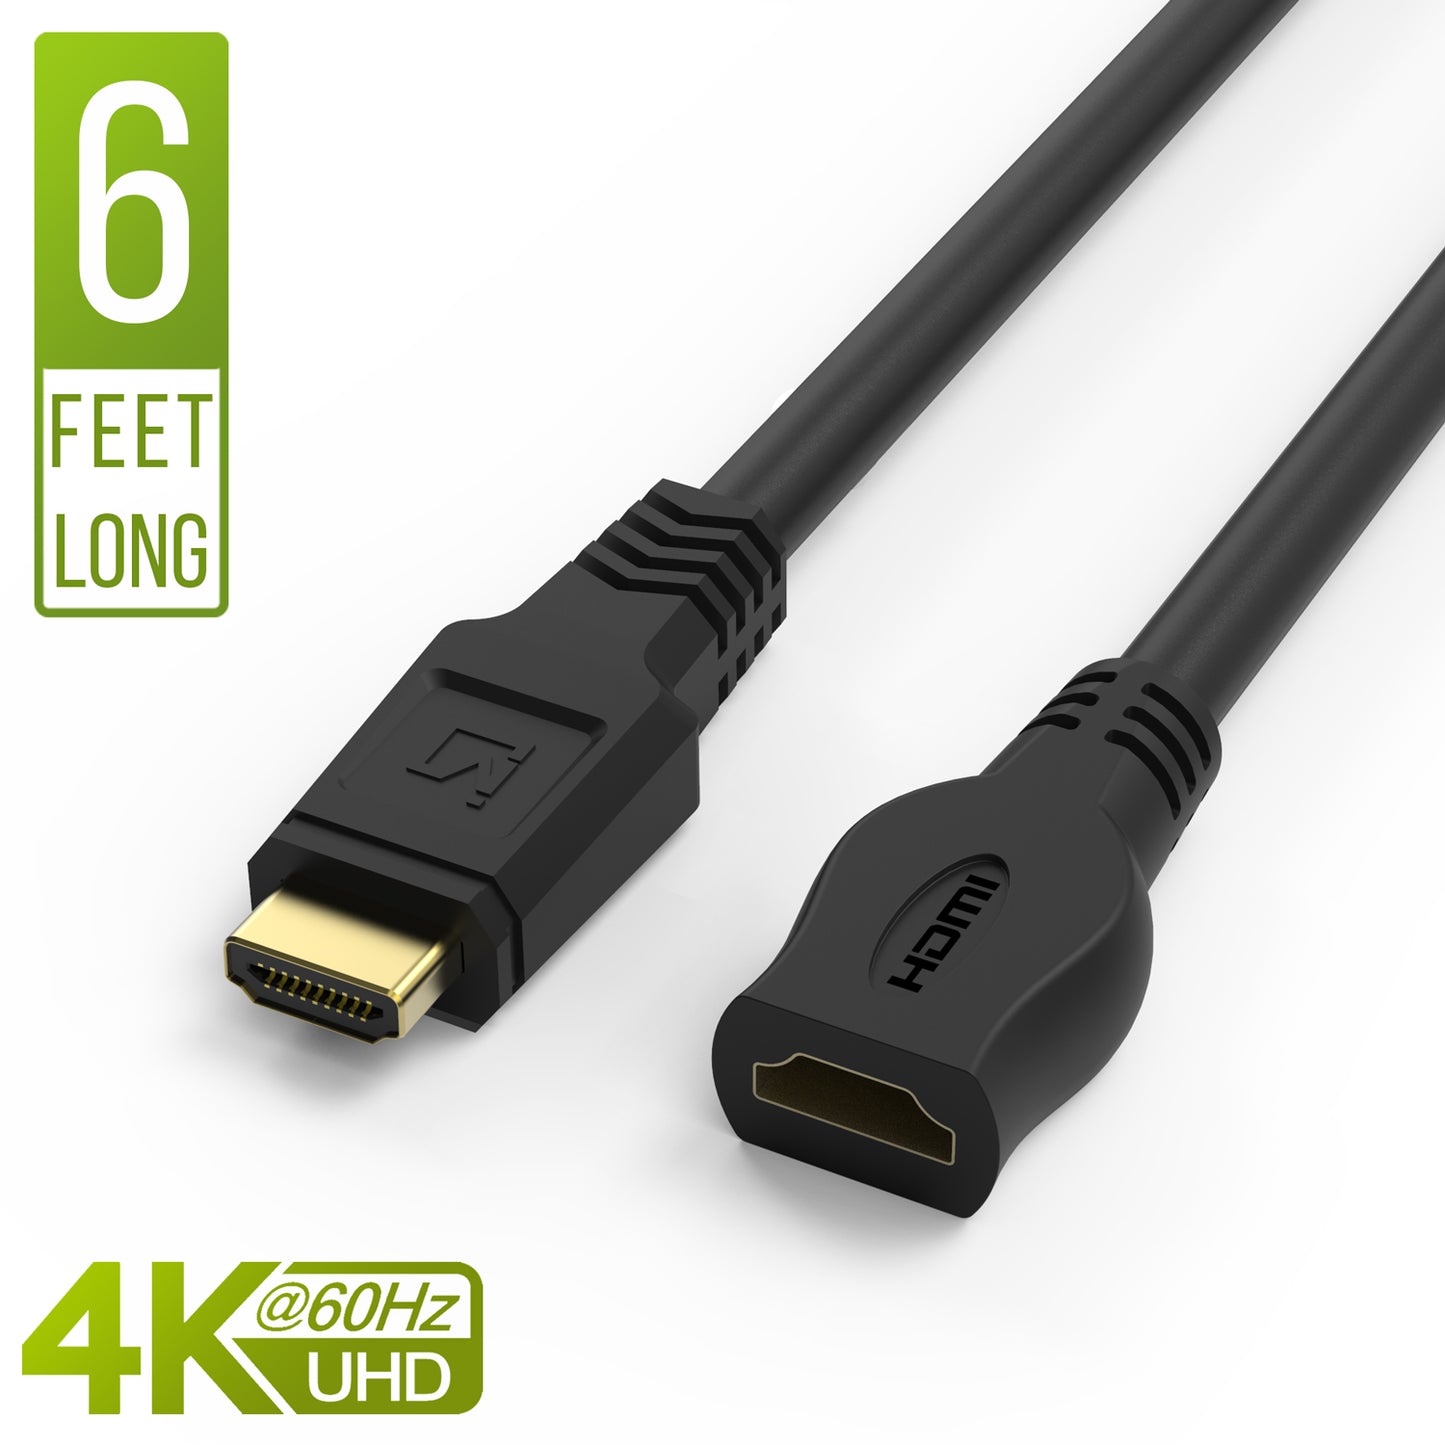 iVoltaa High Speed 4K 60 Hz Female HDMI to Male HDMI 2.0 Cable